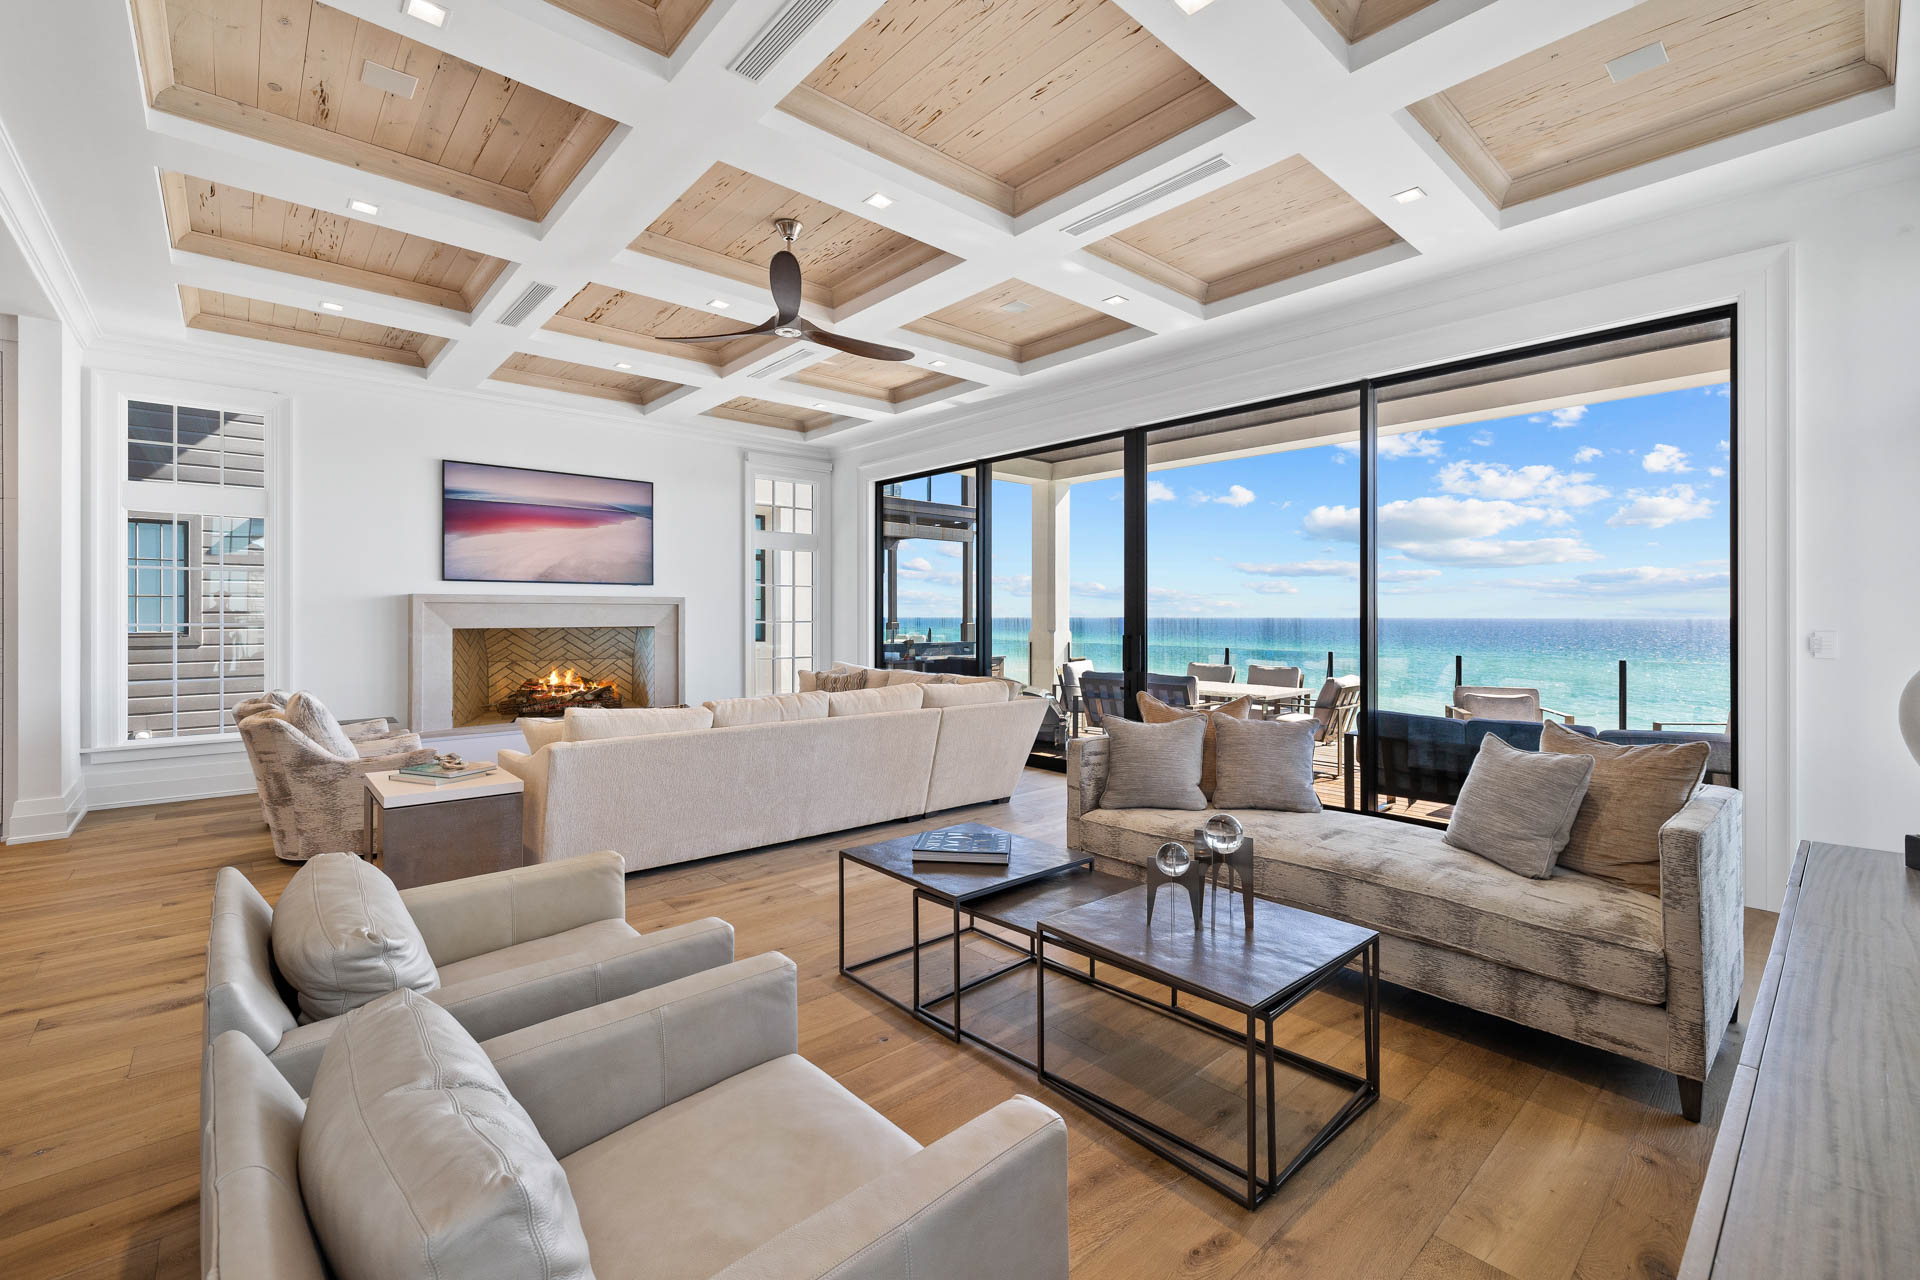 Embrace the timeless elegance of Luxury Coastal Interior Design: A Luxurious Contemporary Transitional Escape in Destin, FL